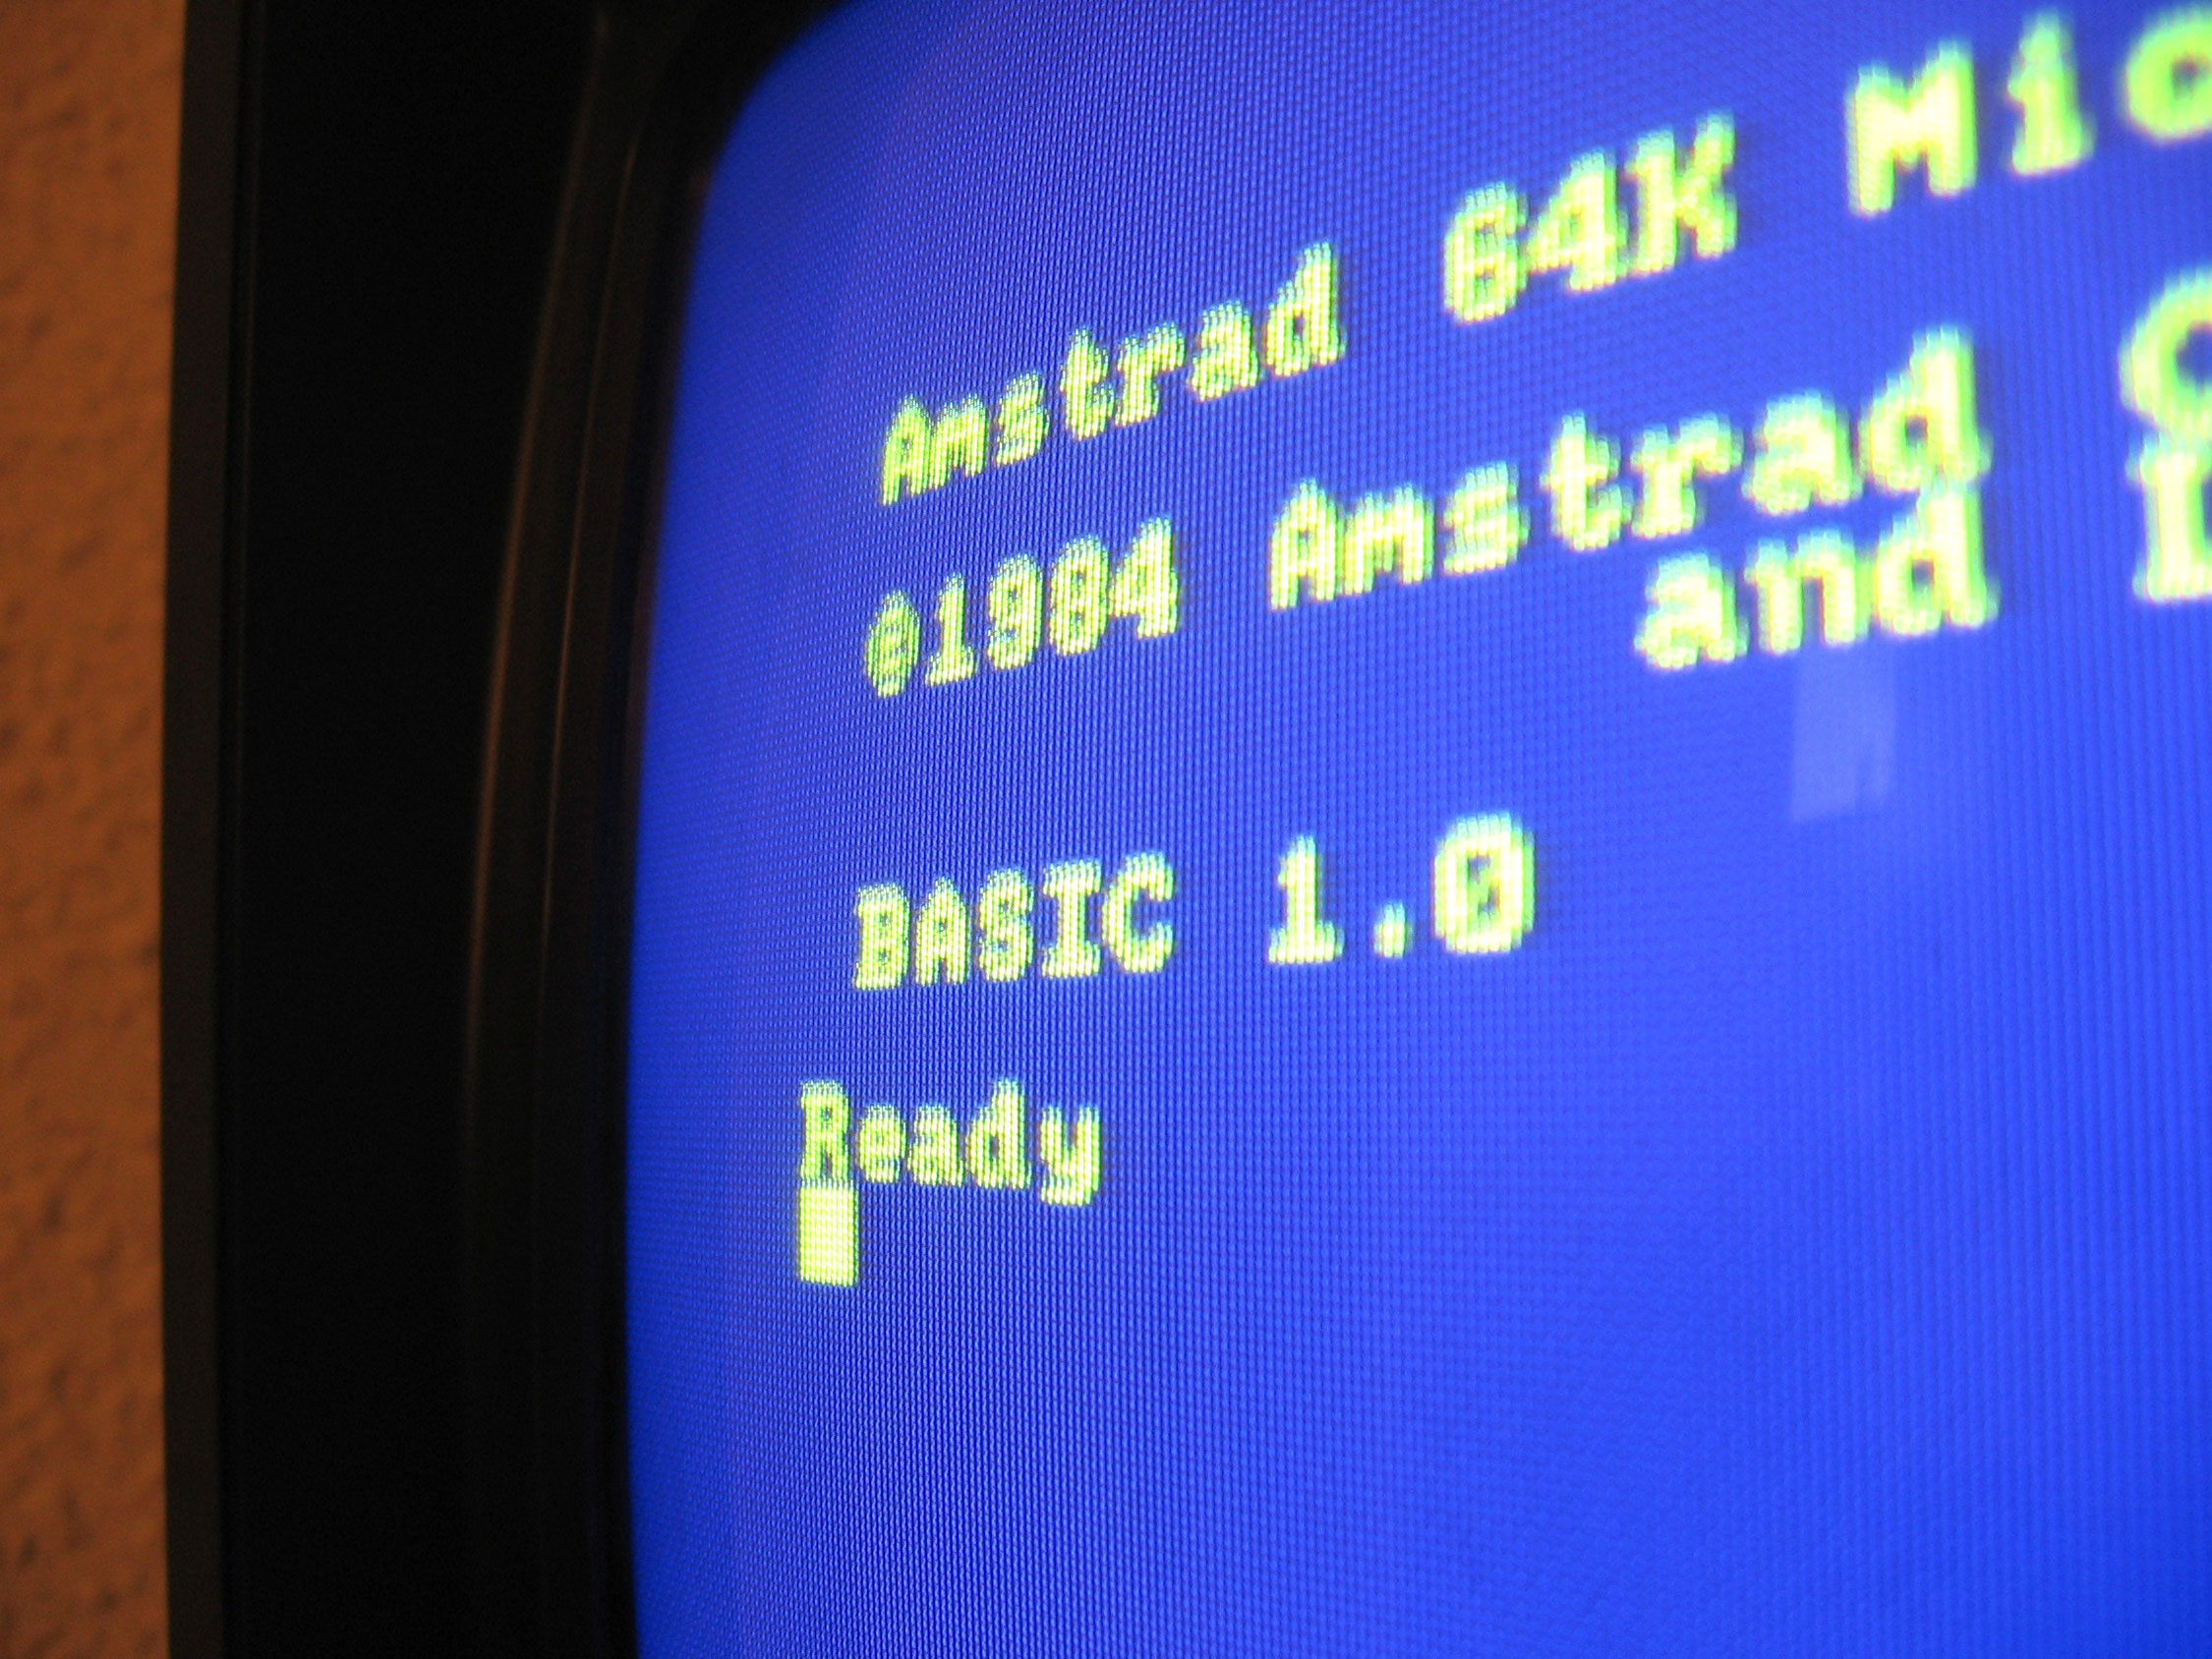 Amstrad CPC user interface showing yellow text on a dark blue background